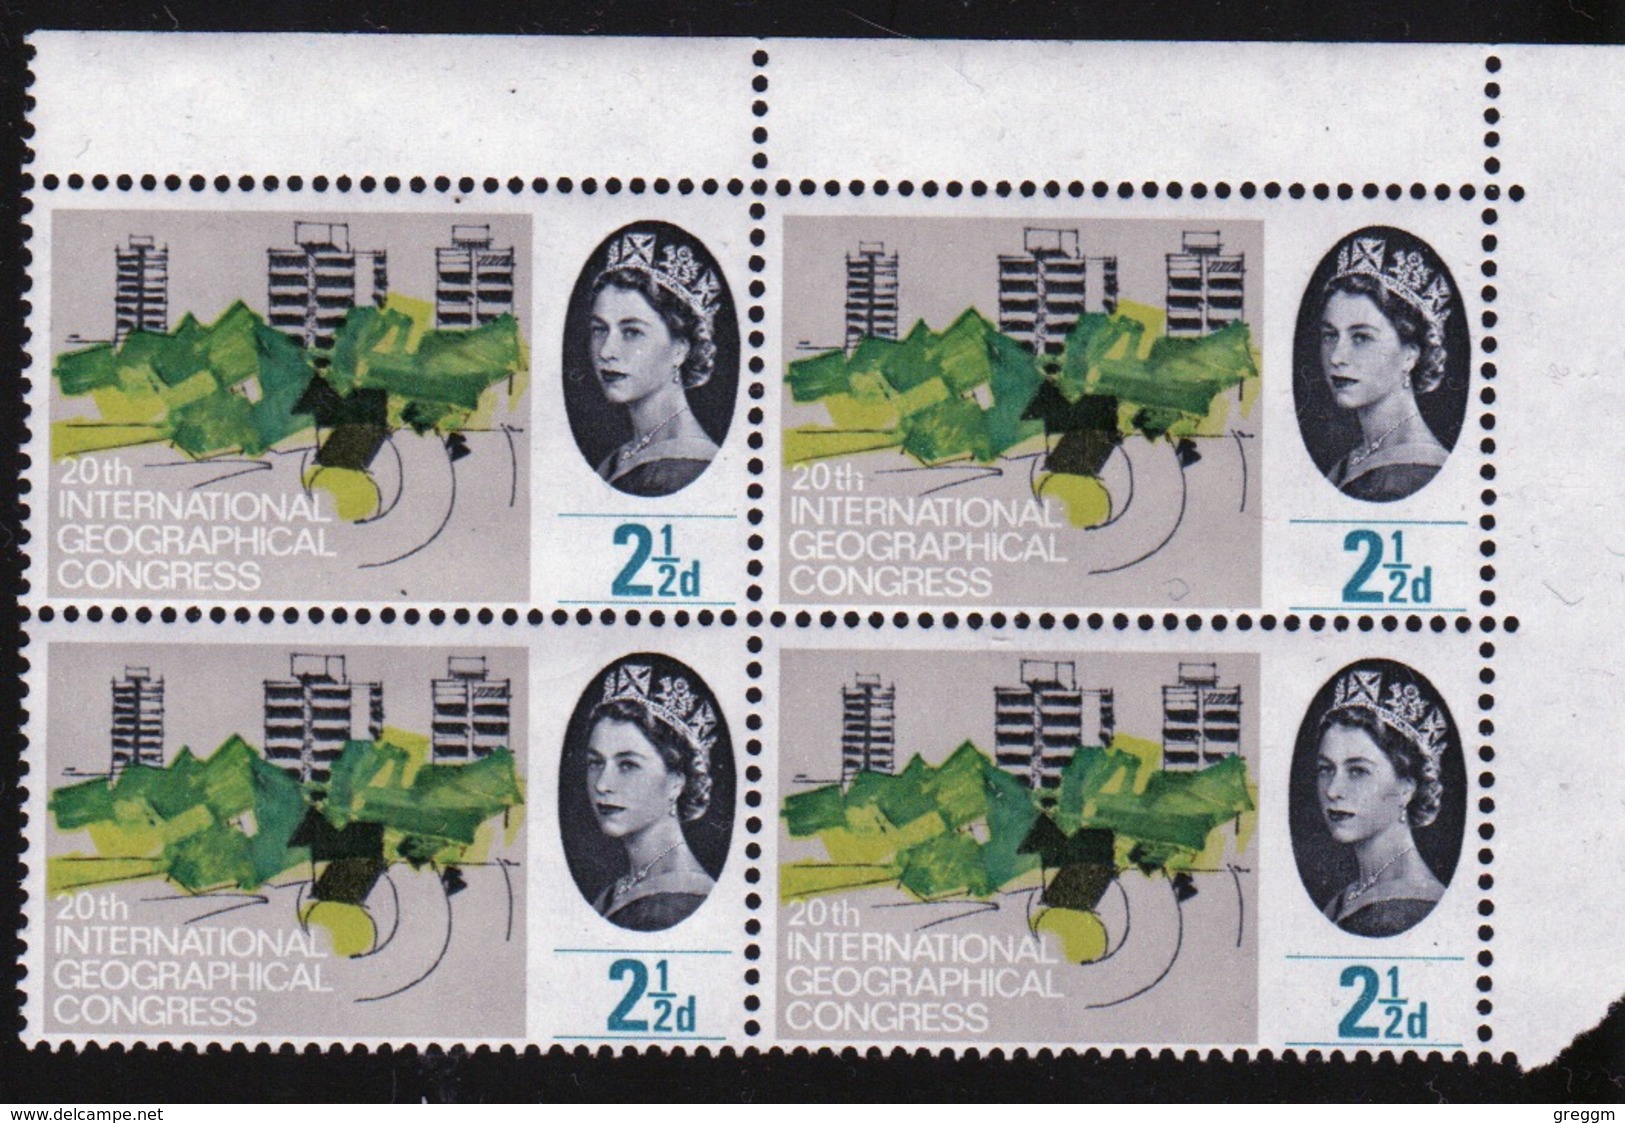 GB Mint Corner Block Of Four Geographical Congress Stamps From 1964. - Fogli Completi